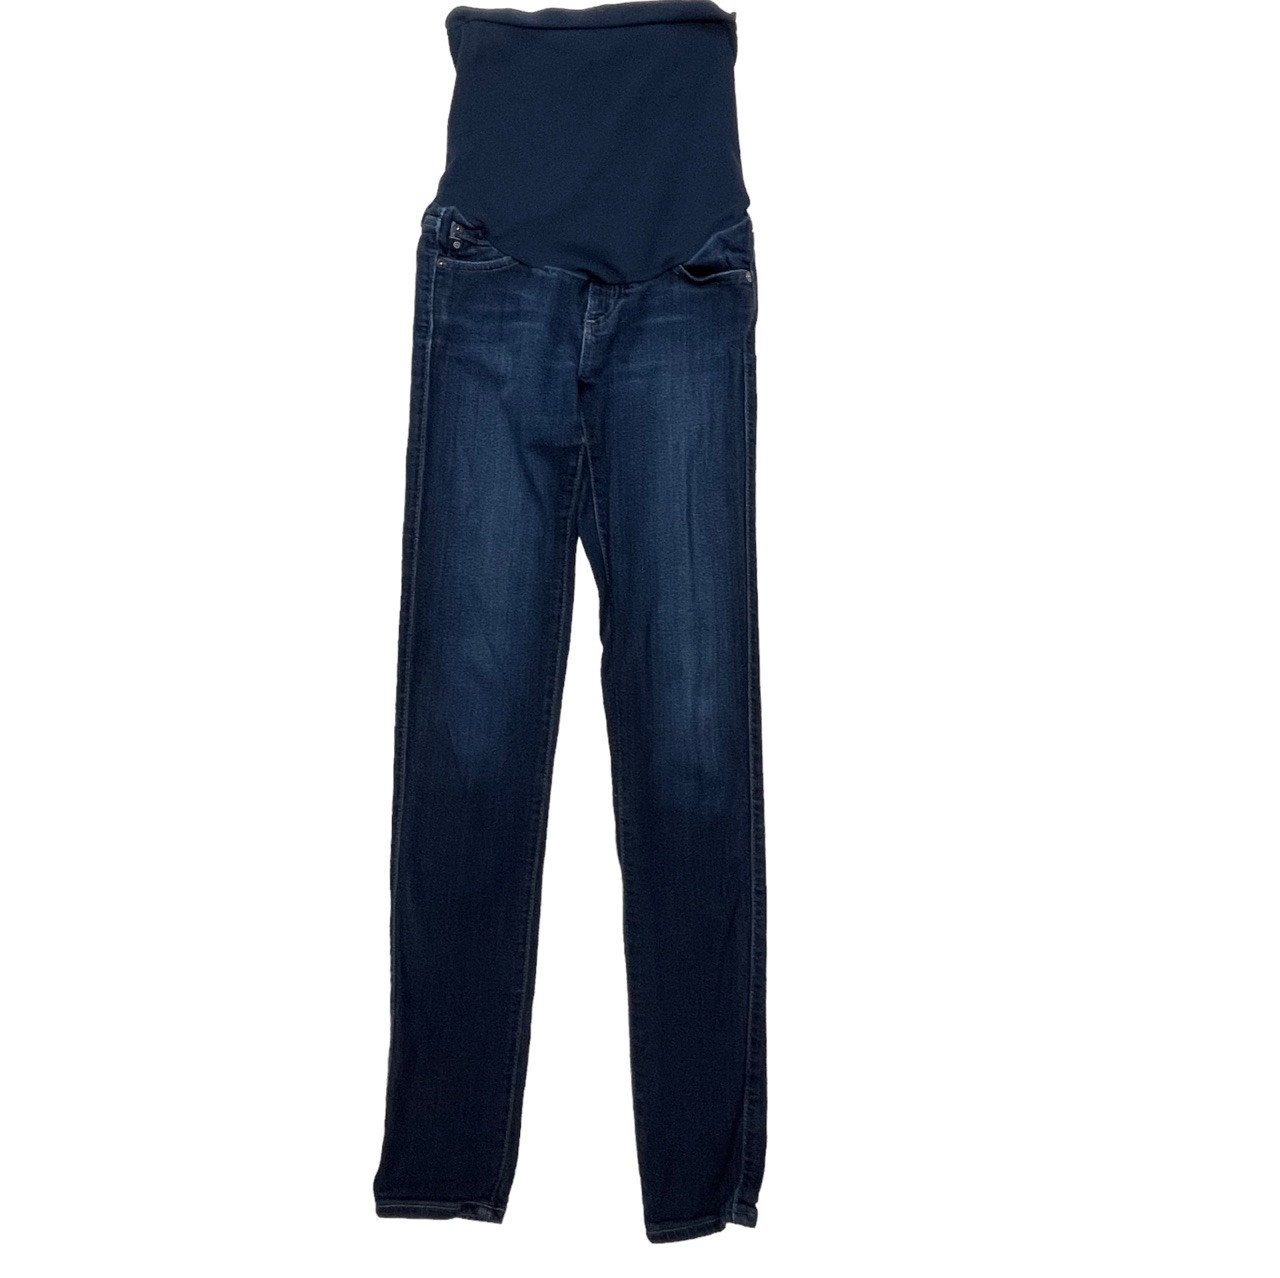 Blue Adriano Goldschmied Skinny Maternity Jeans for A Pea in the Pod  Collection (Gently Used - Size 25R) - Motherhood Closet - Maternity  Consignment